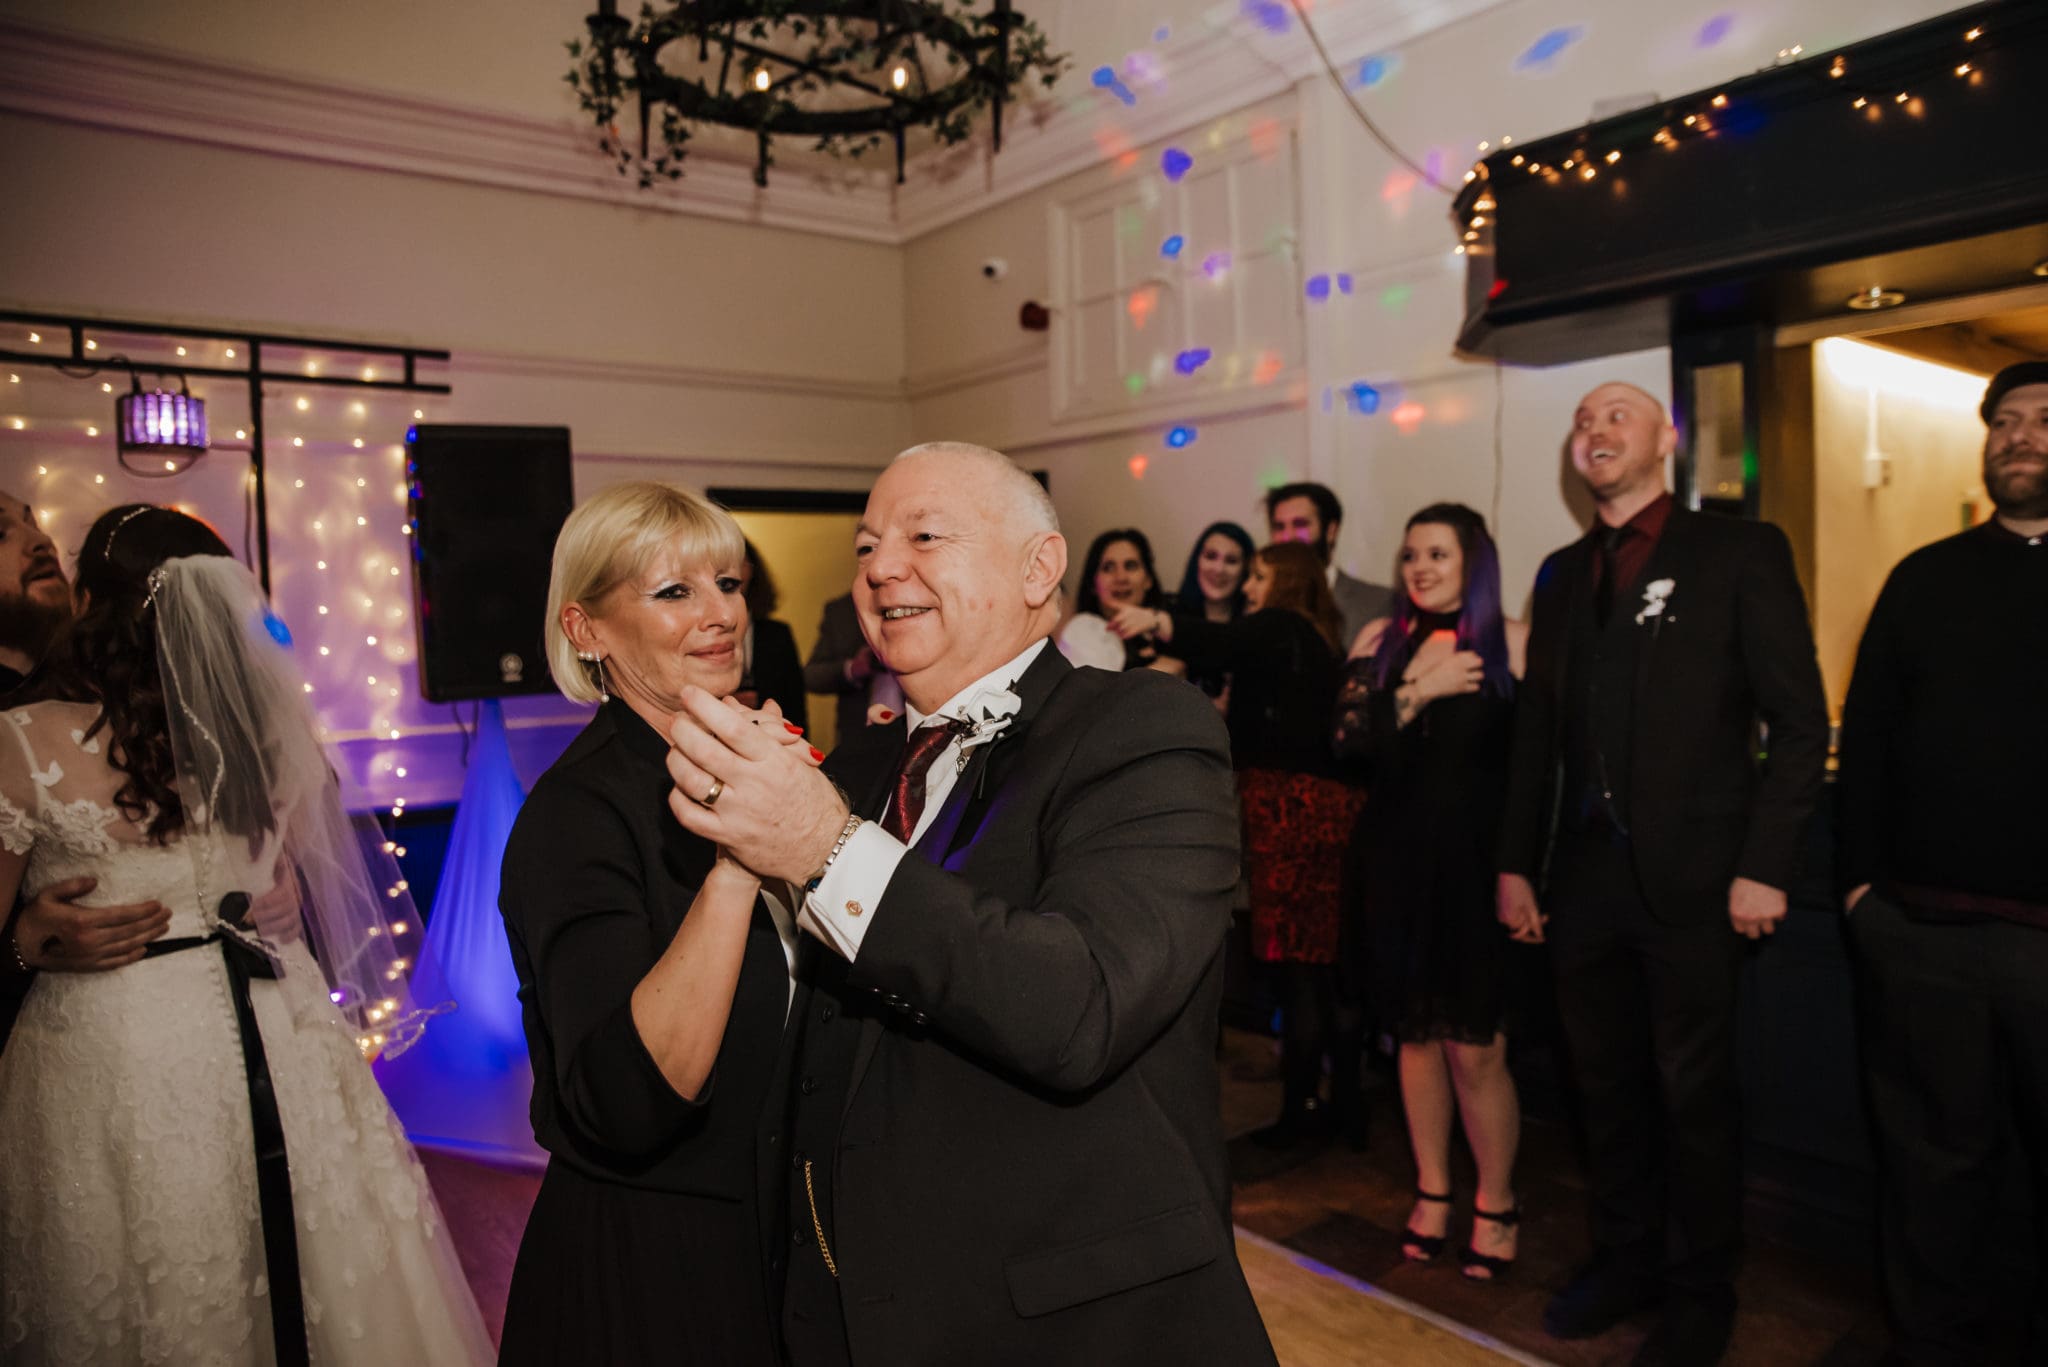 Dancing couple at the wedding reception Shenley cricket club , white wedding dress, black and red themed wedding